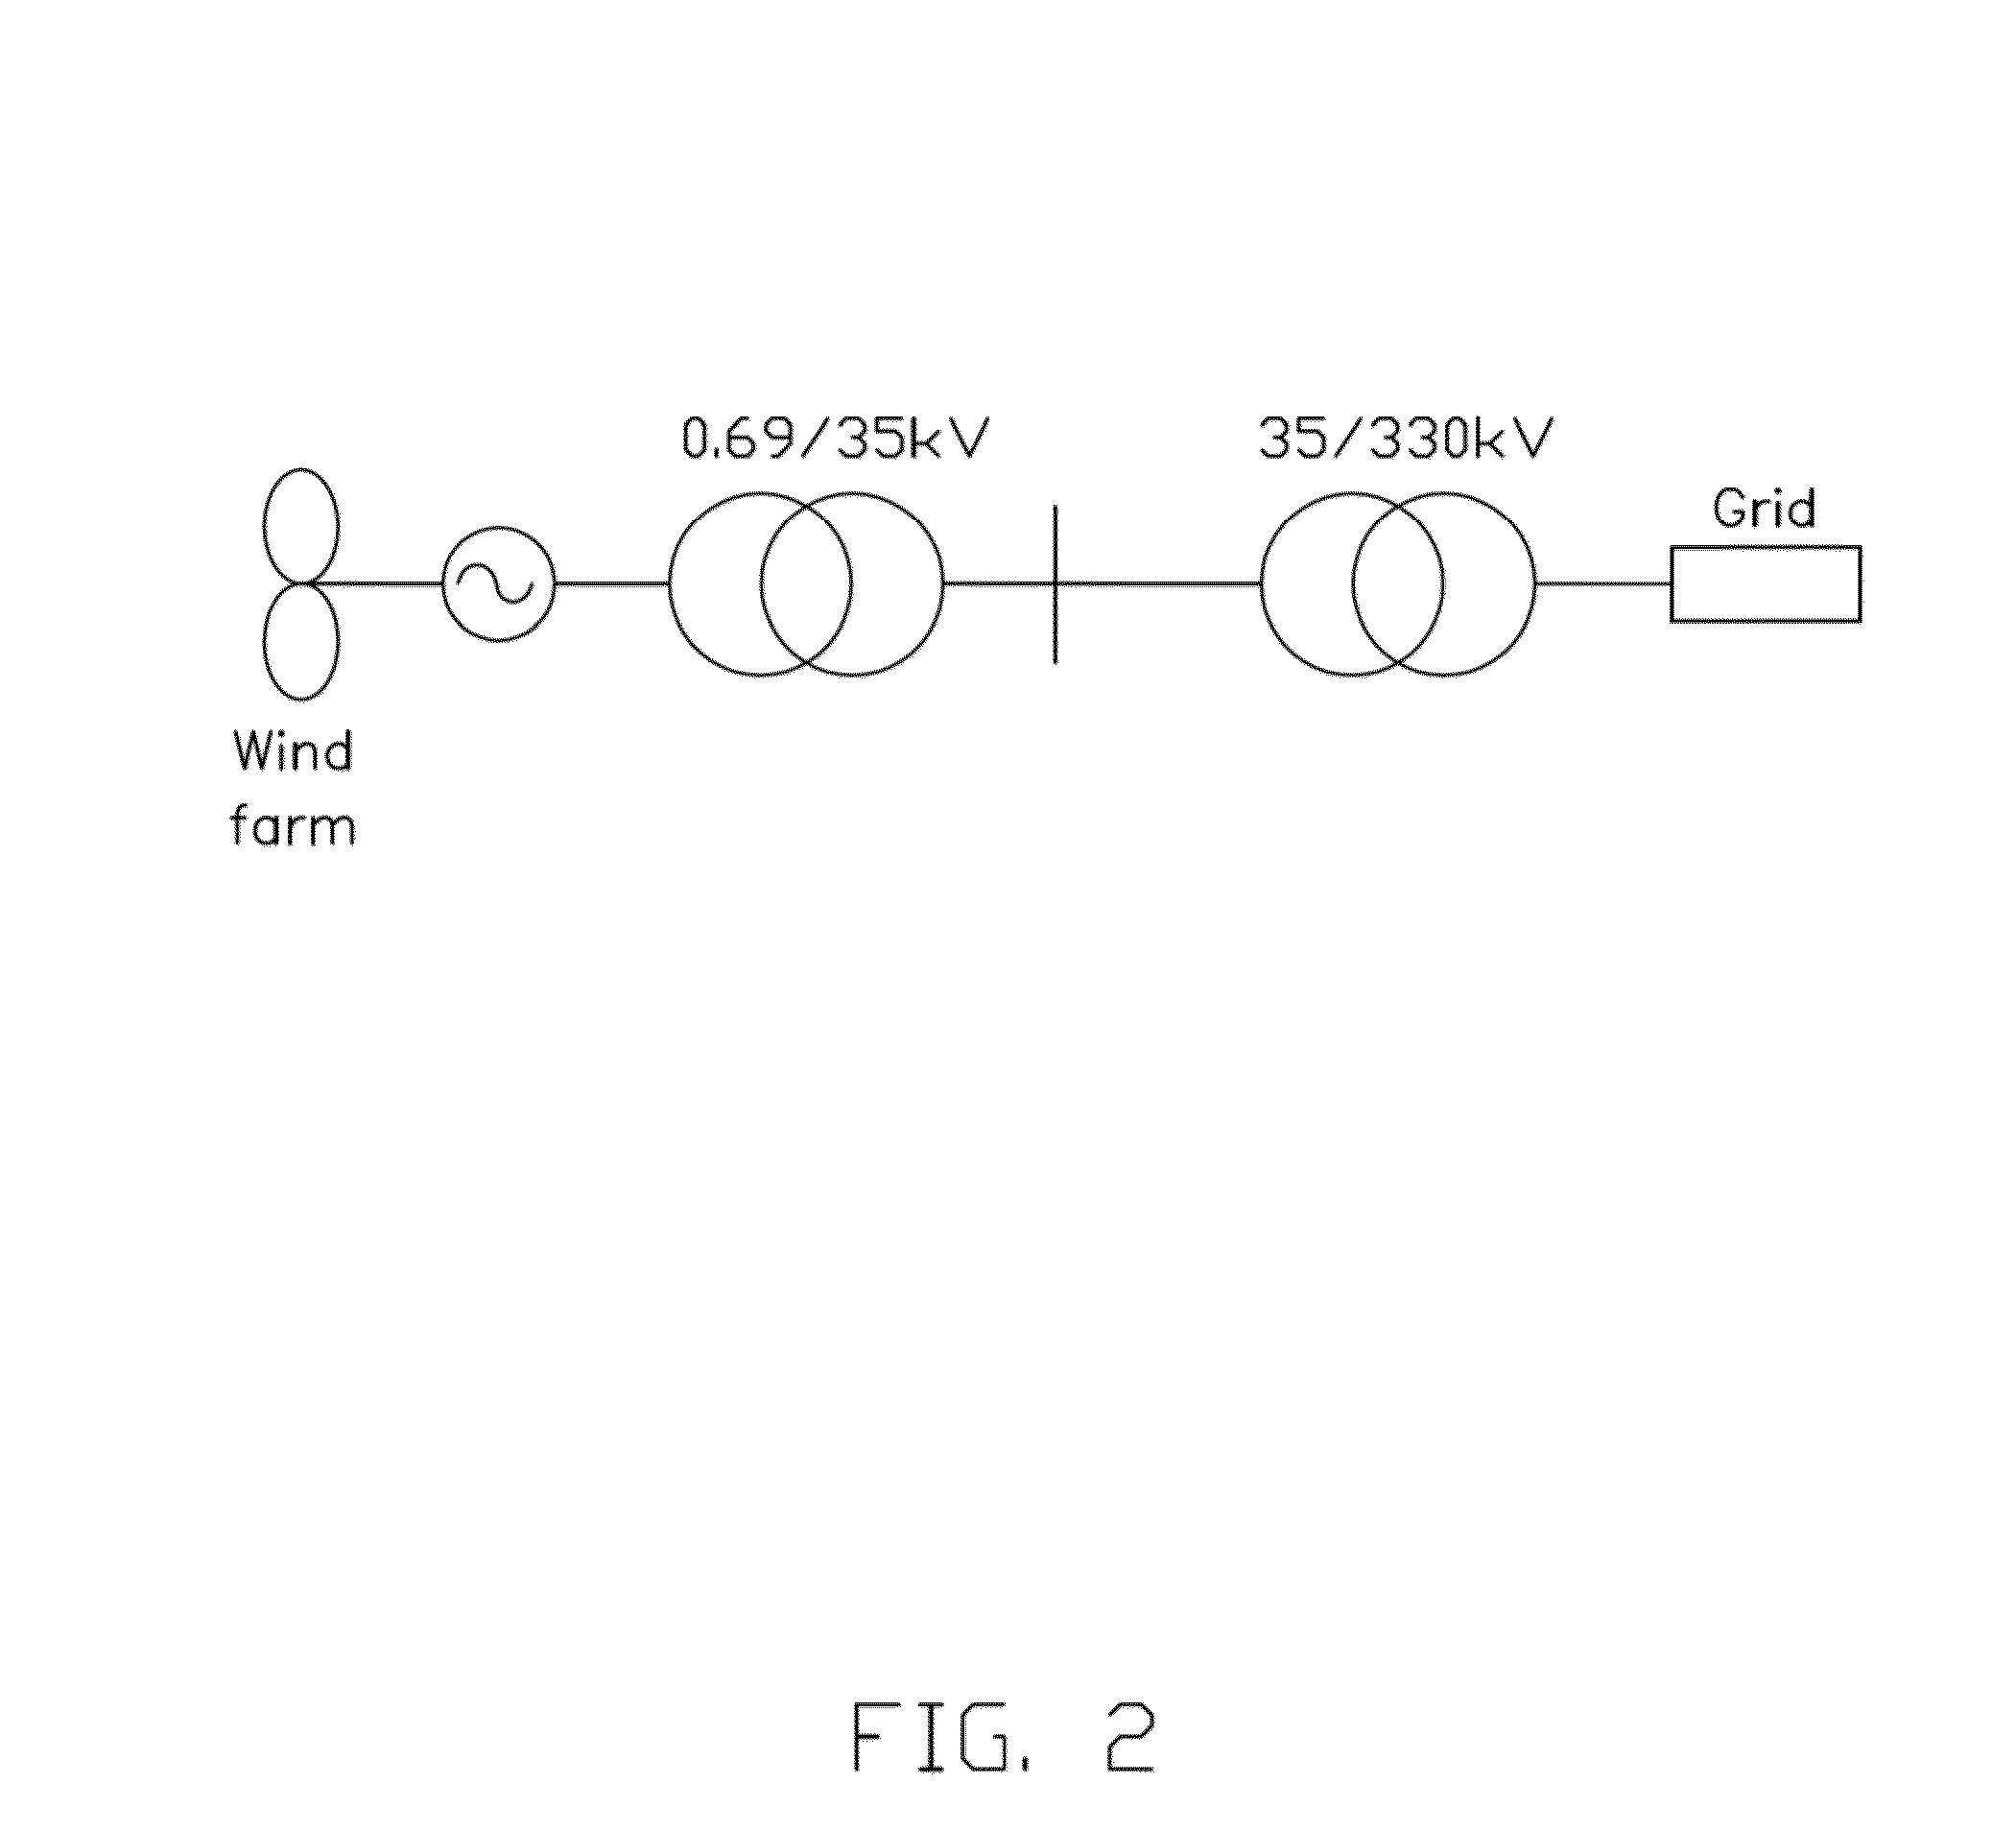 Method for constructing wind power connection system model based on measured data